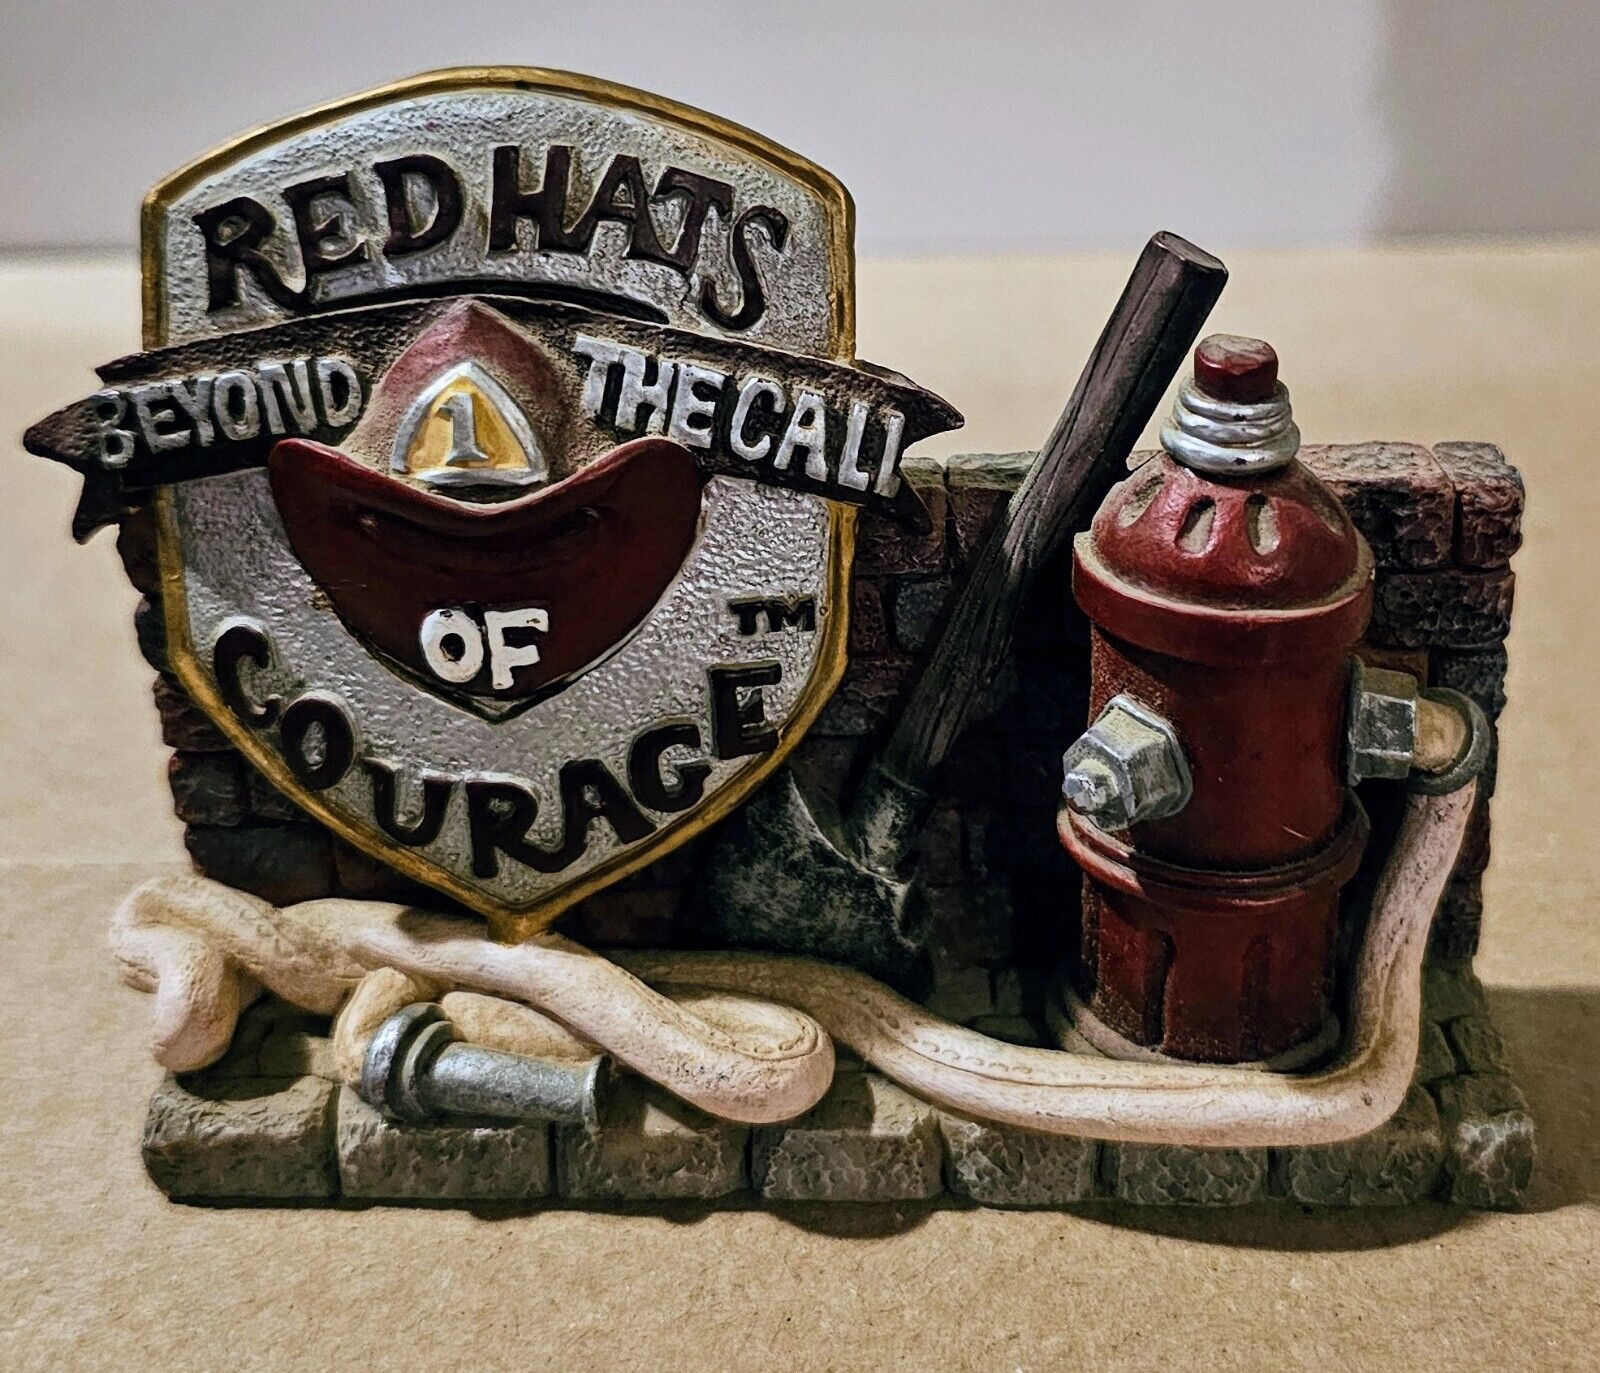 Red Hats Beyond The Call of Courage Fire Hydrant Hose Hat Axe On Brick Hearth 3\